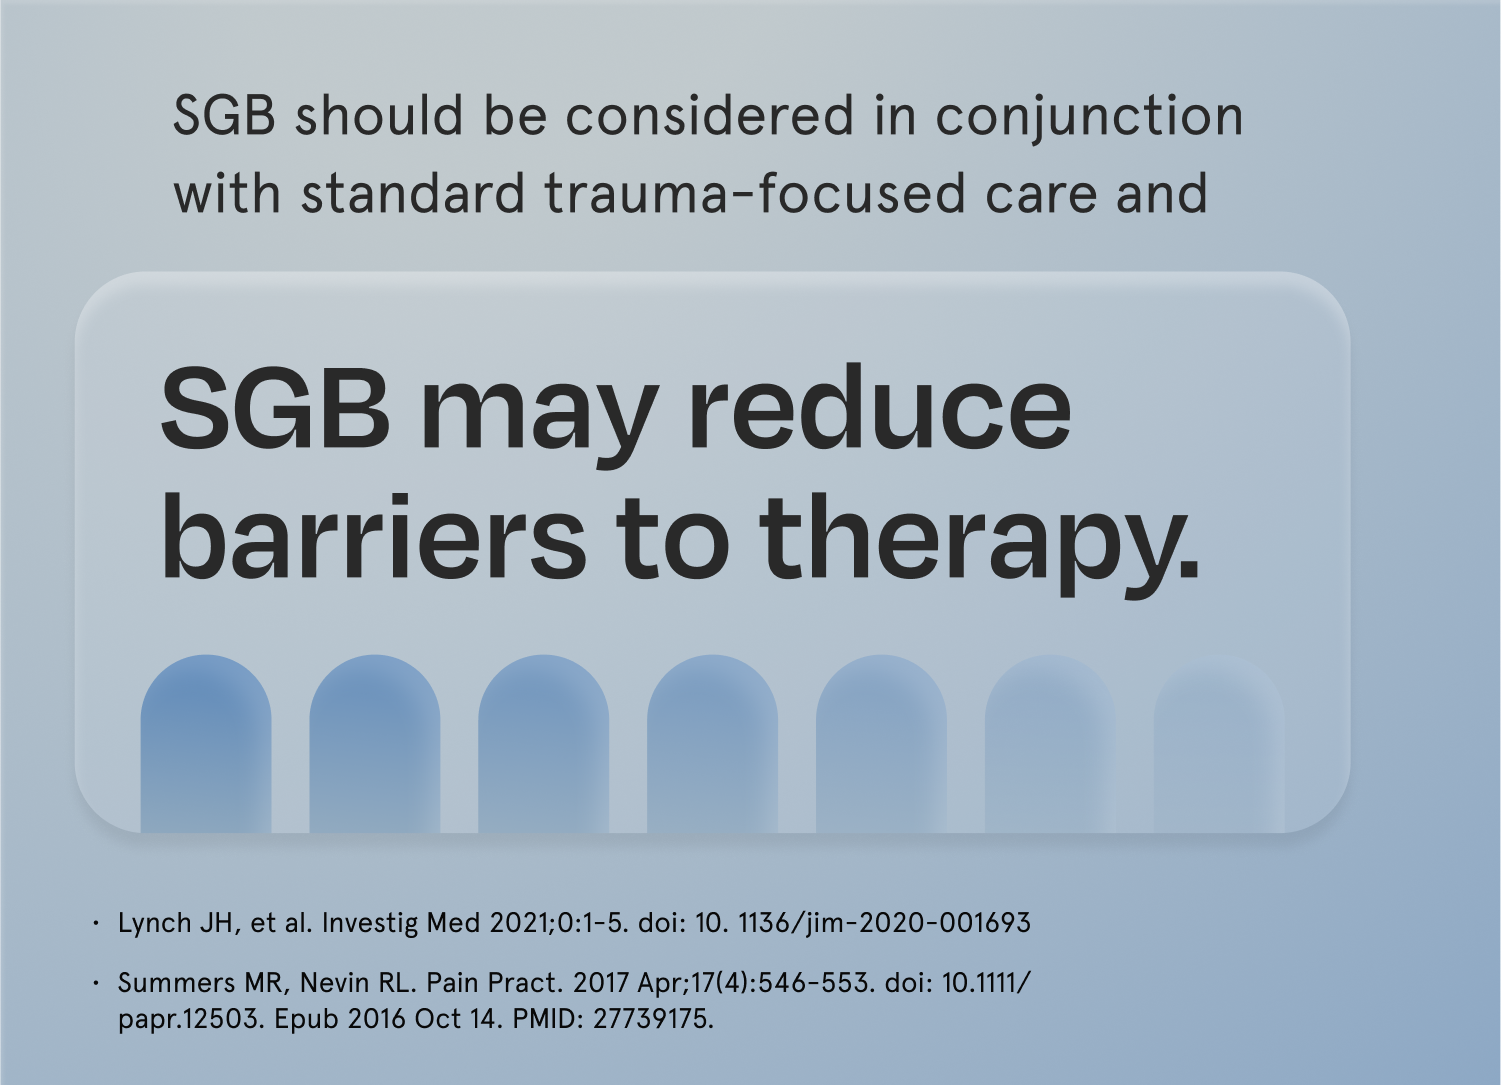 SGB may reduce barriers to therapy